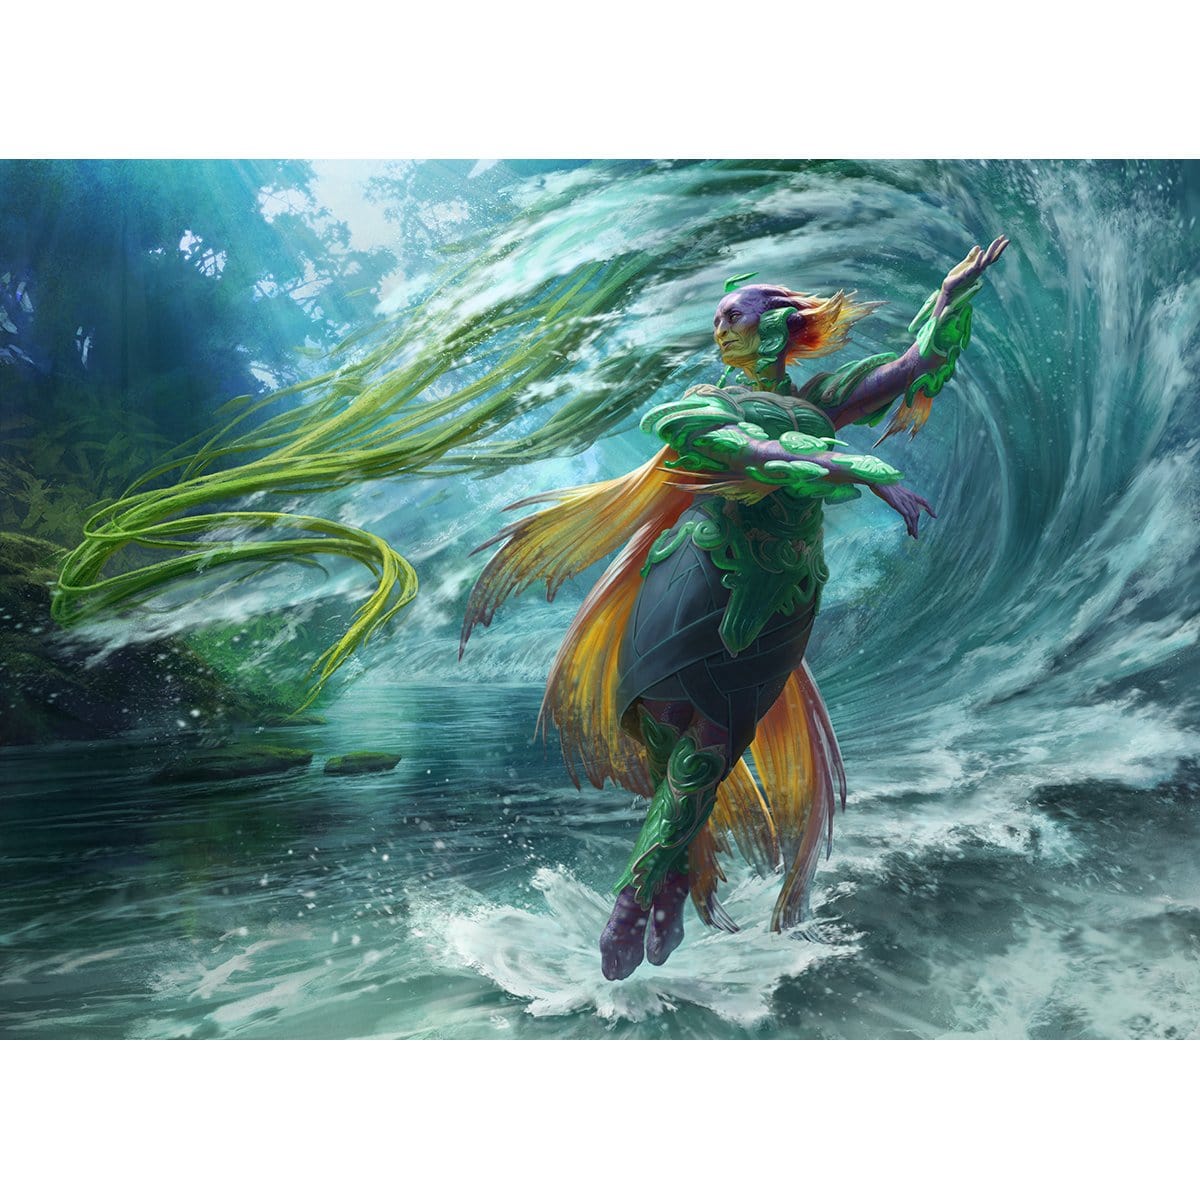 Tishana, Voice of Thunder Print - Print - Original Magic Art - Accessories for Magic the Gathering and other card games